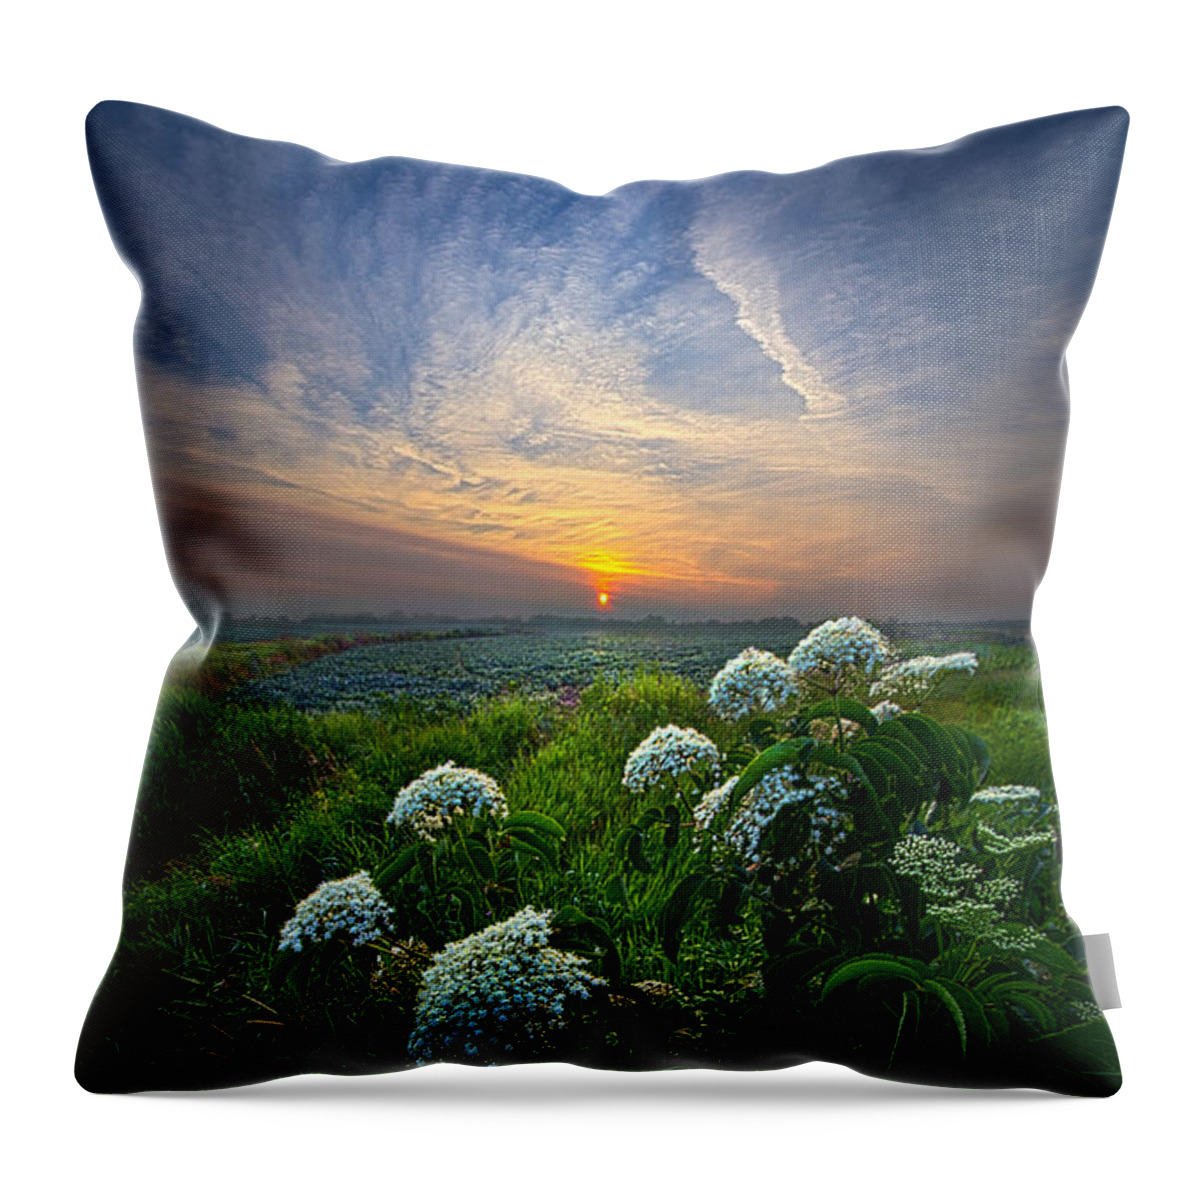 Flowers Throw Pillow featuring the photograph One Small Step by Phil Koch